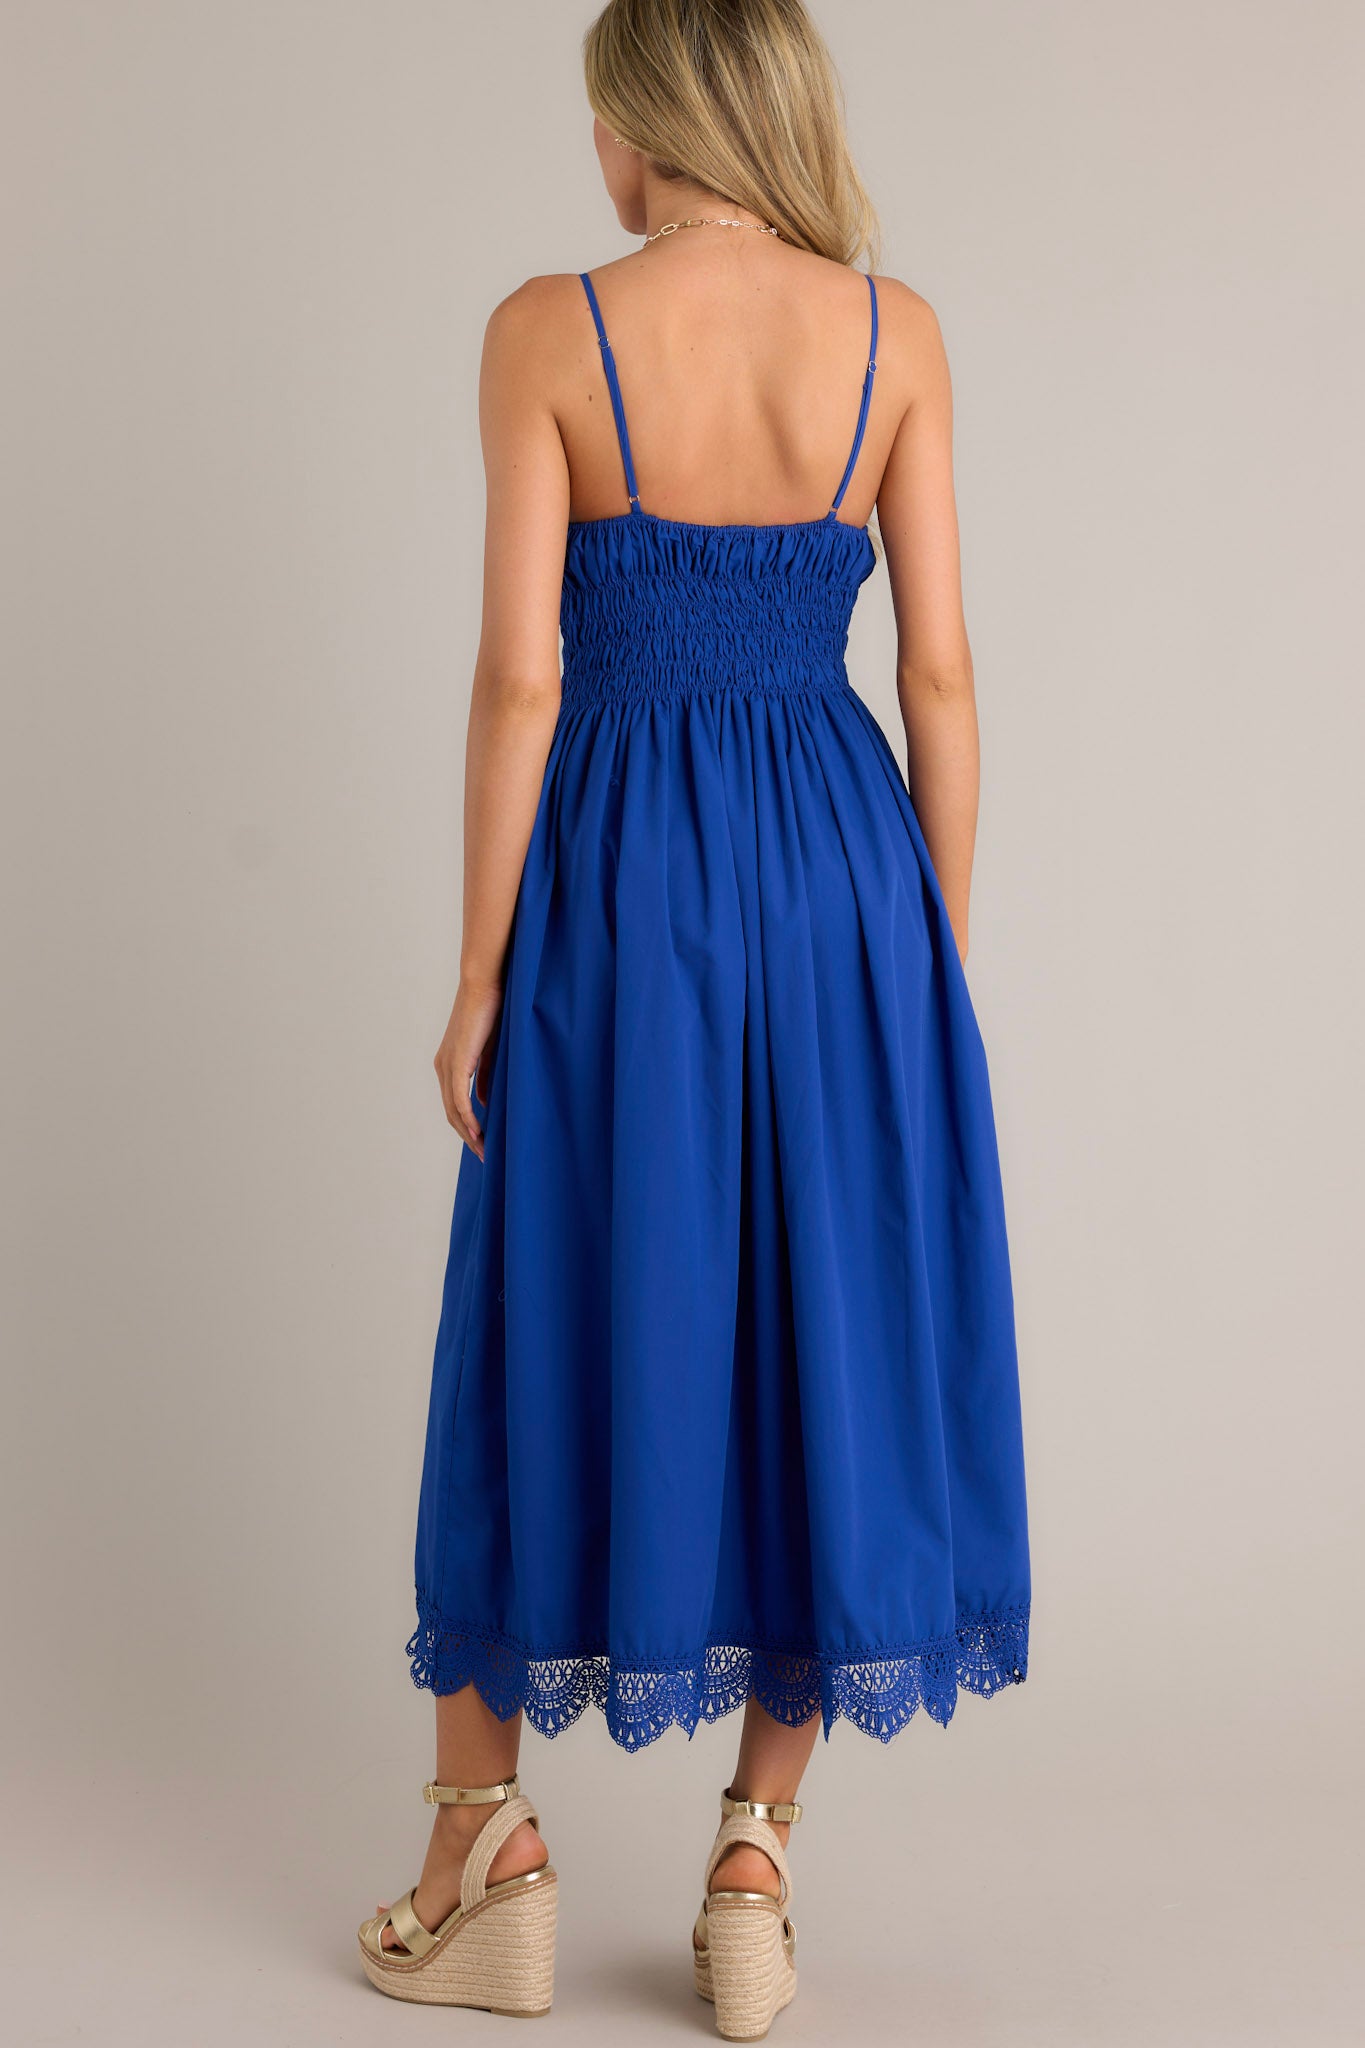 Back view of a blue maxi dress highlighting the fully smocked waist & back, thin adjustable straps, and lace hemline.